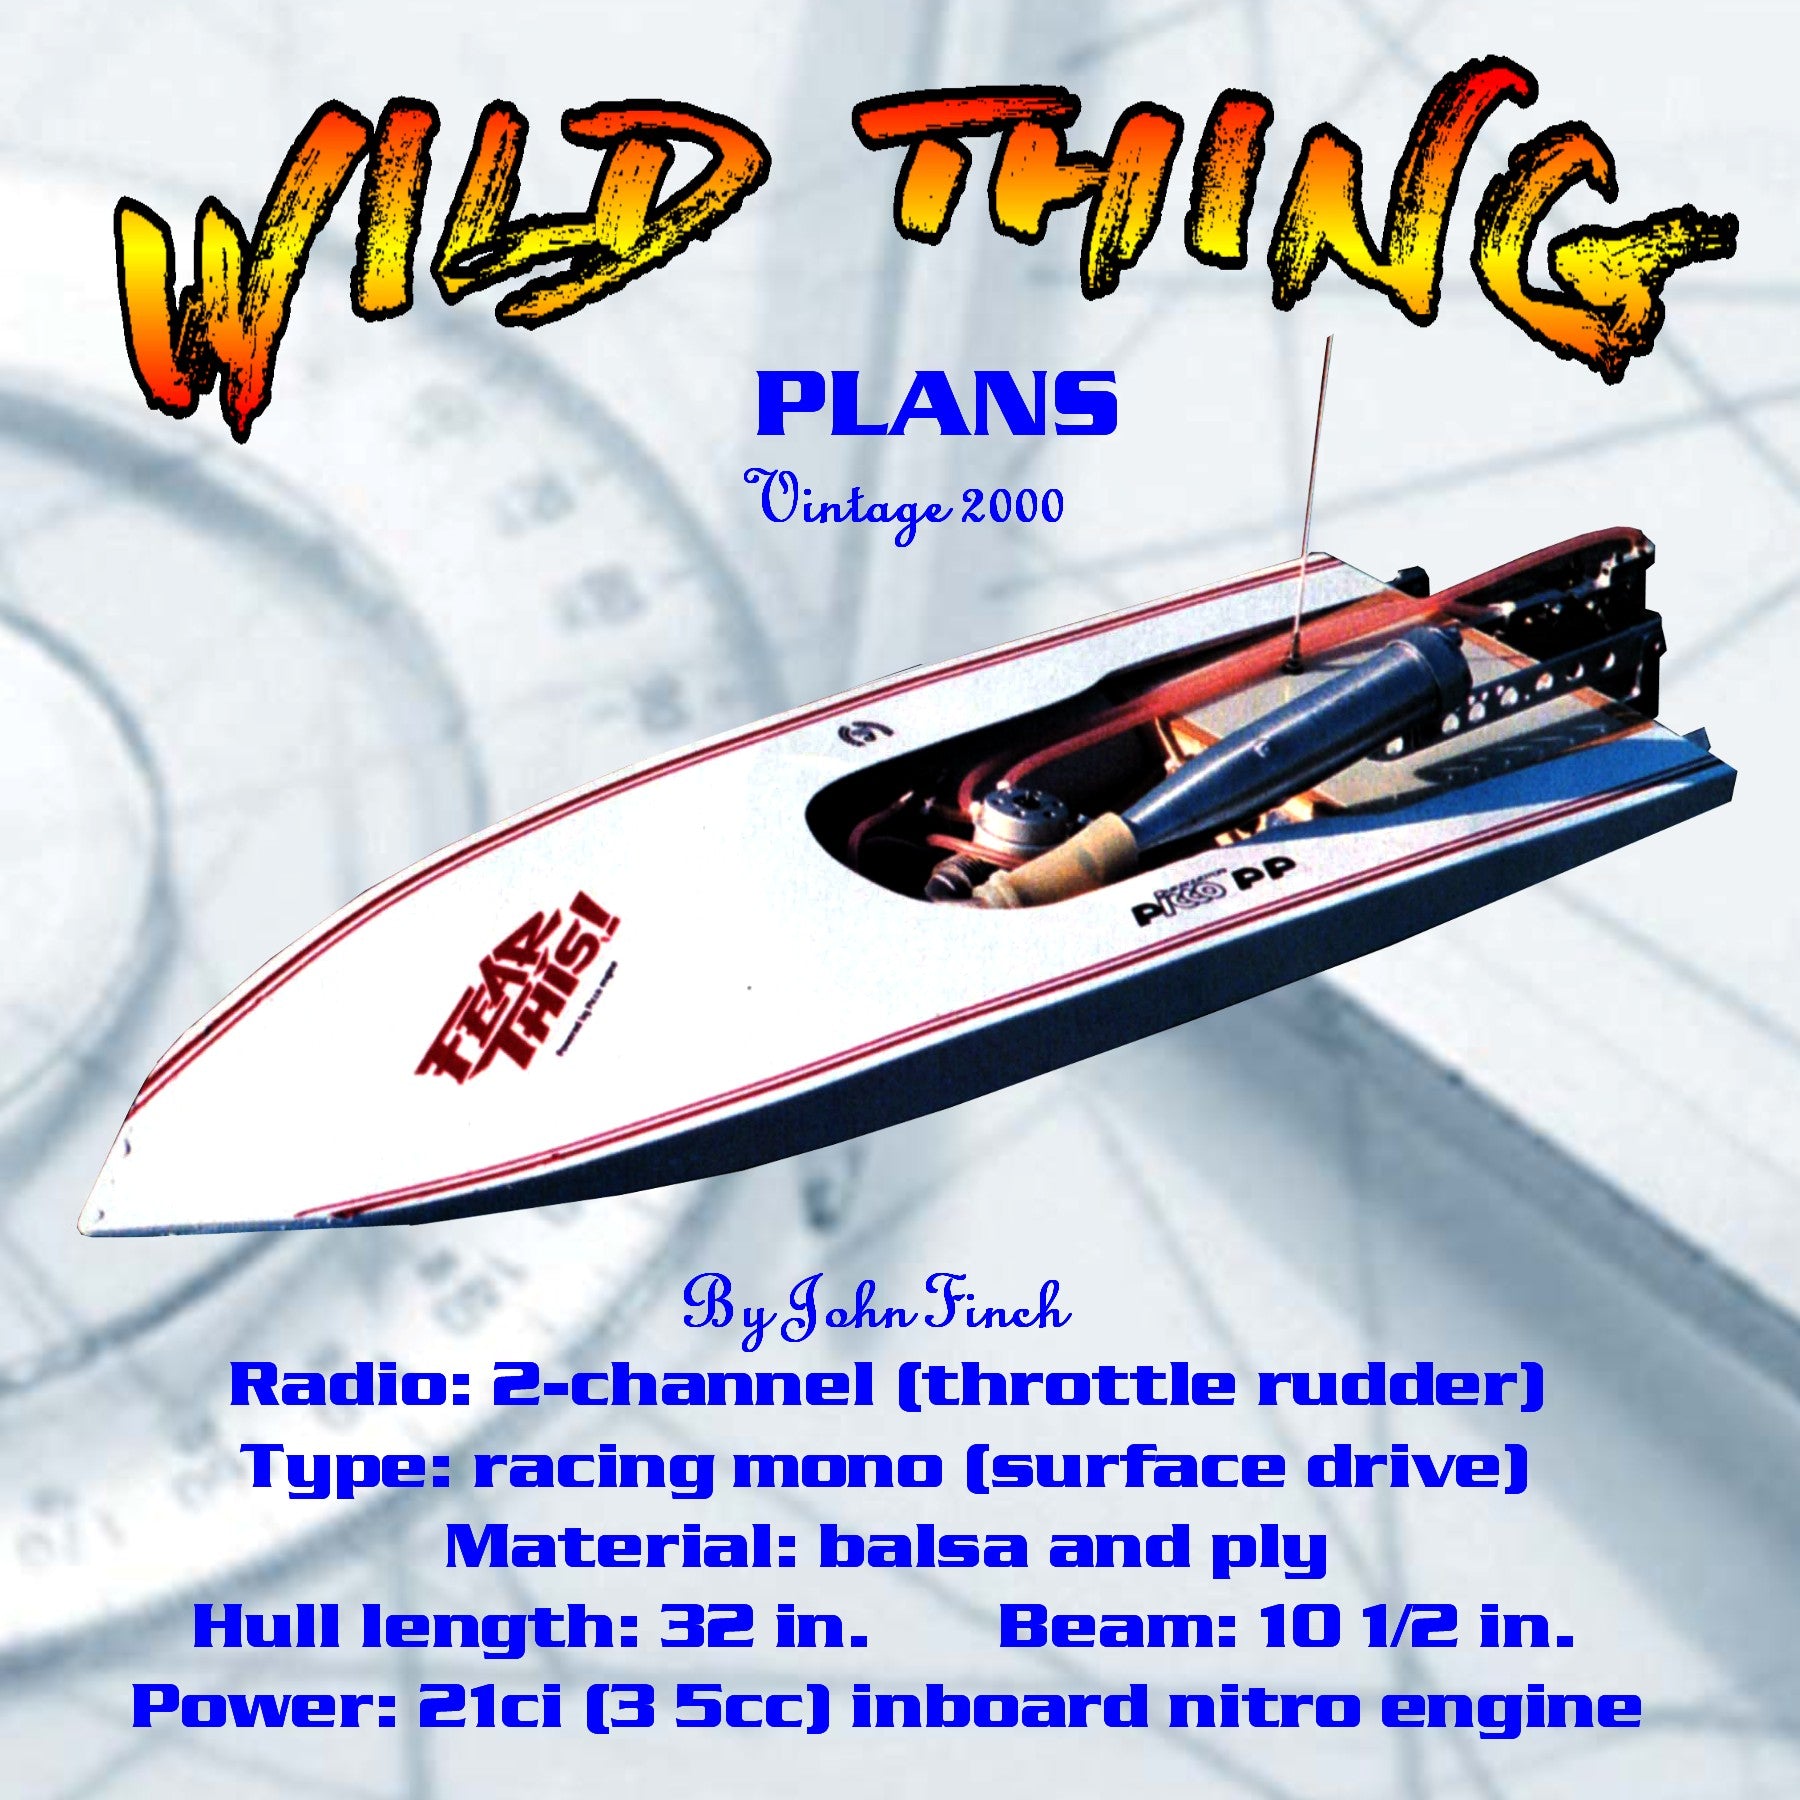 full size printed plan inboard racing mono hull the wild thing for radio control